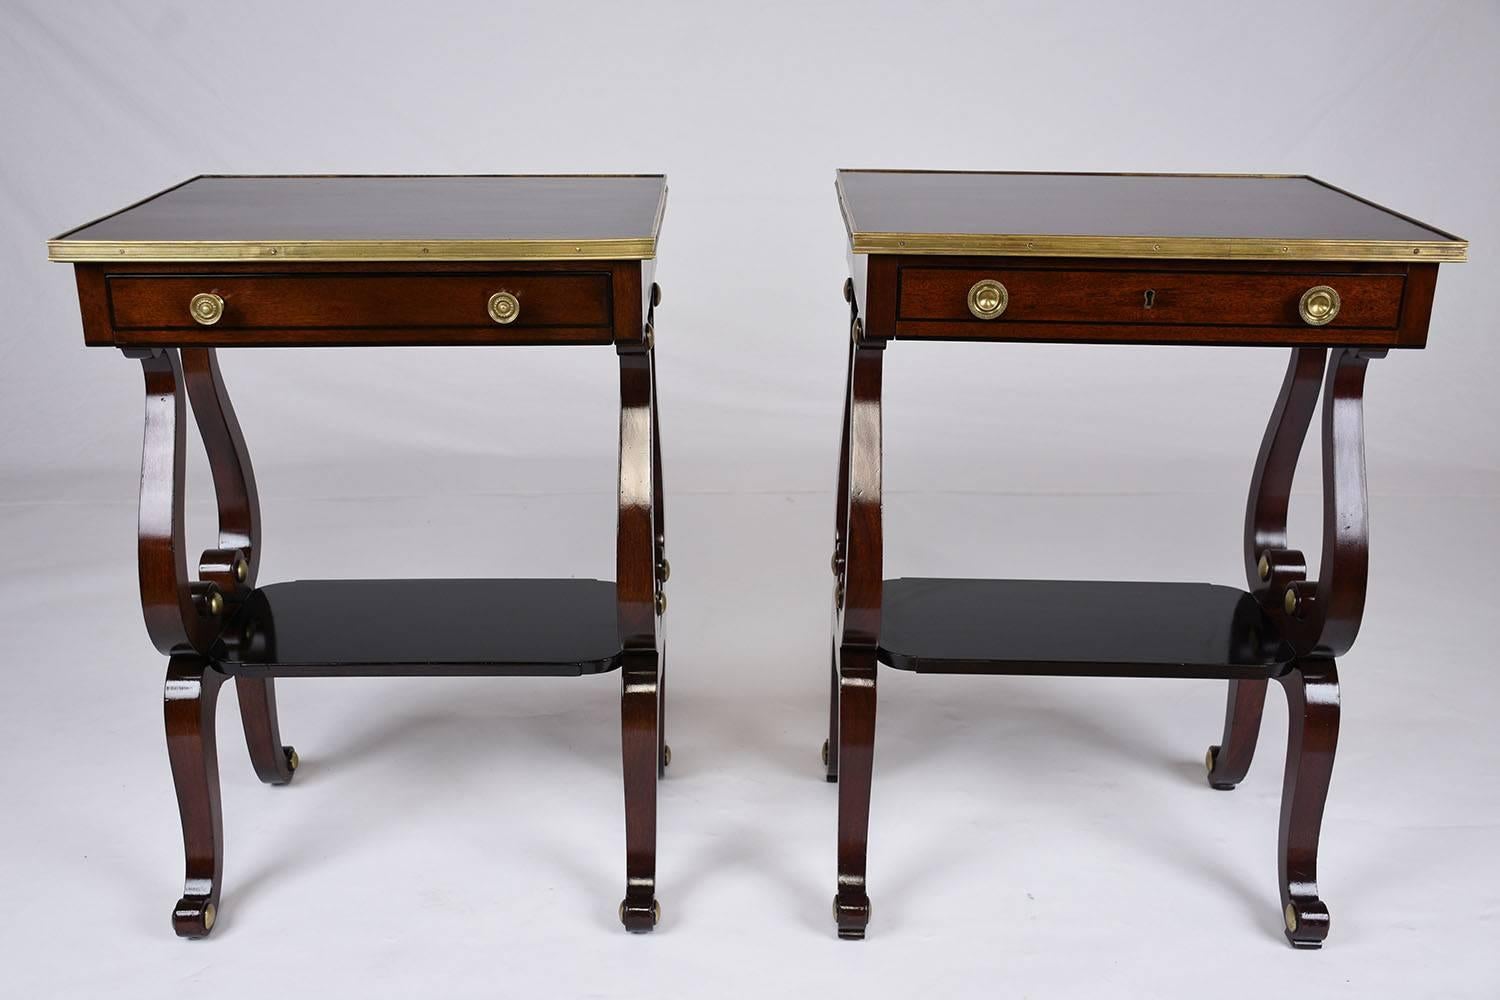 This 1910s antique English regency style pair of side tables is made from mahogany wood that has been finished in both a mahogany color and lacquered black stain. The wooden tops of the side tables feature brass moulding details. Below there is a